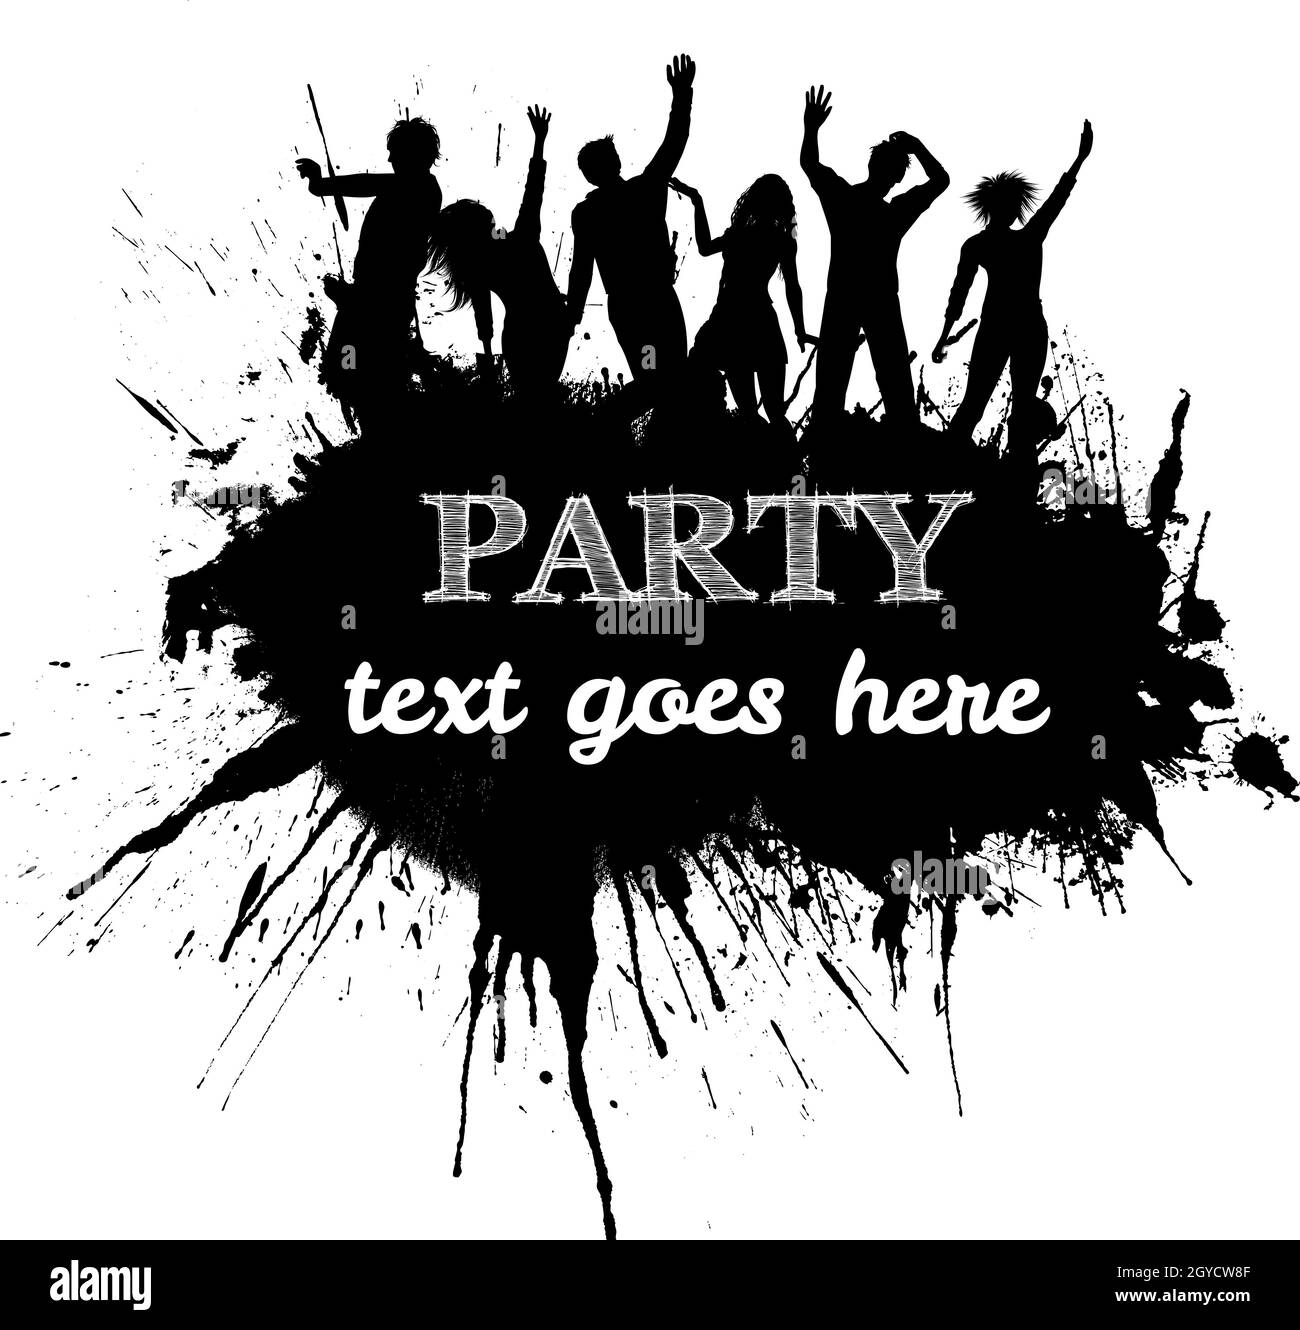 Silhouettes of party people crowd on a grunge background Stock Photo